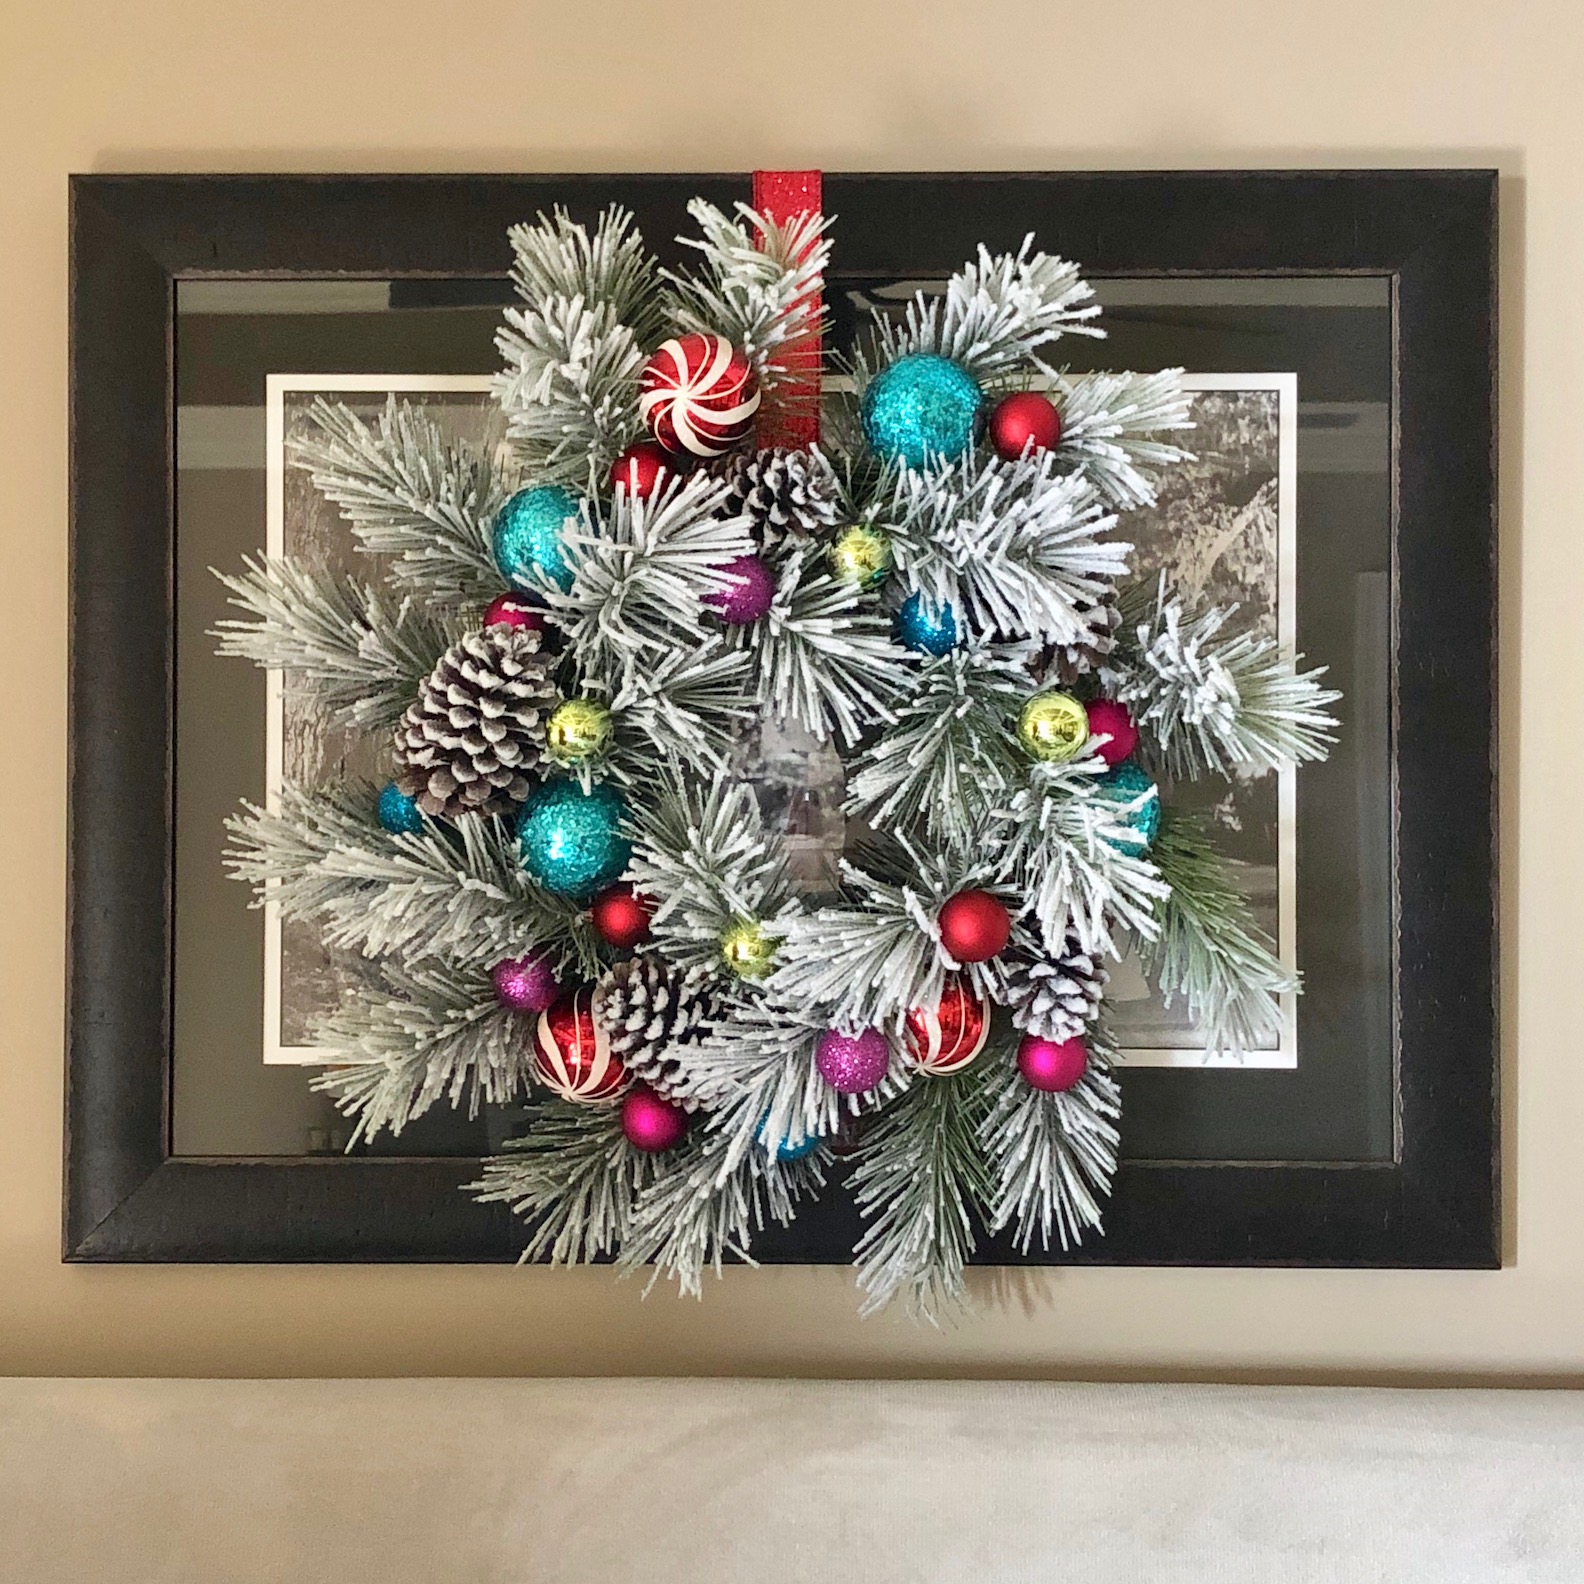 Christmas Wreath, done by me!